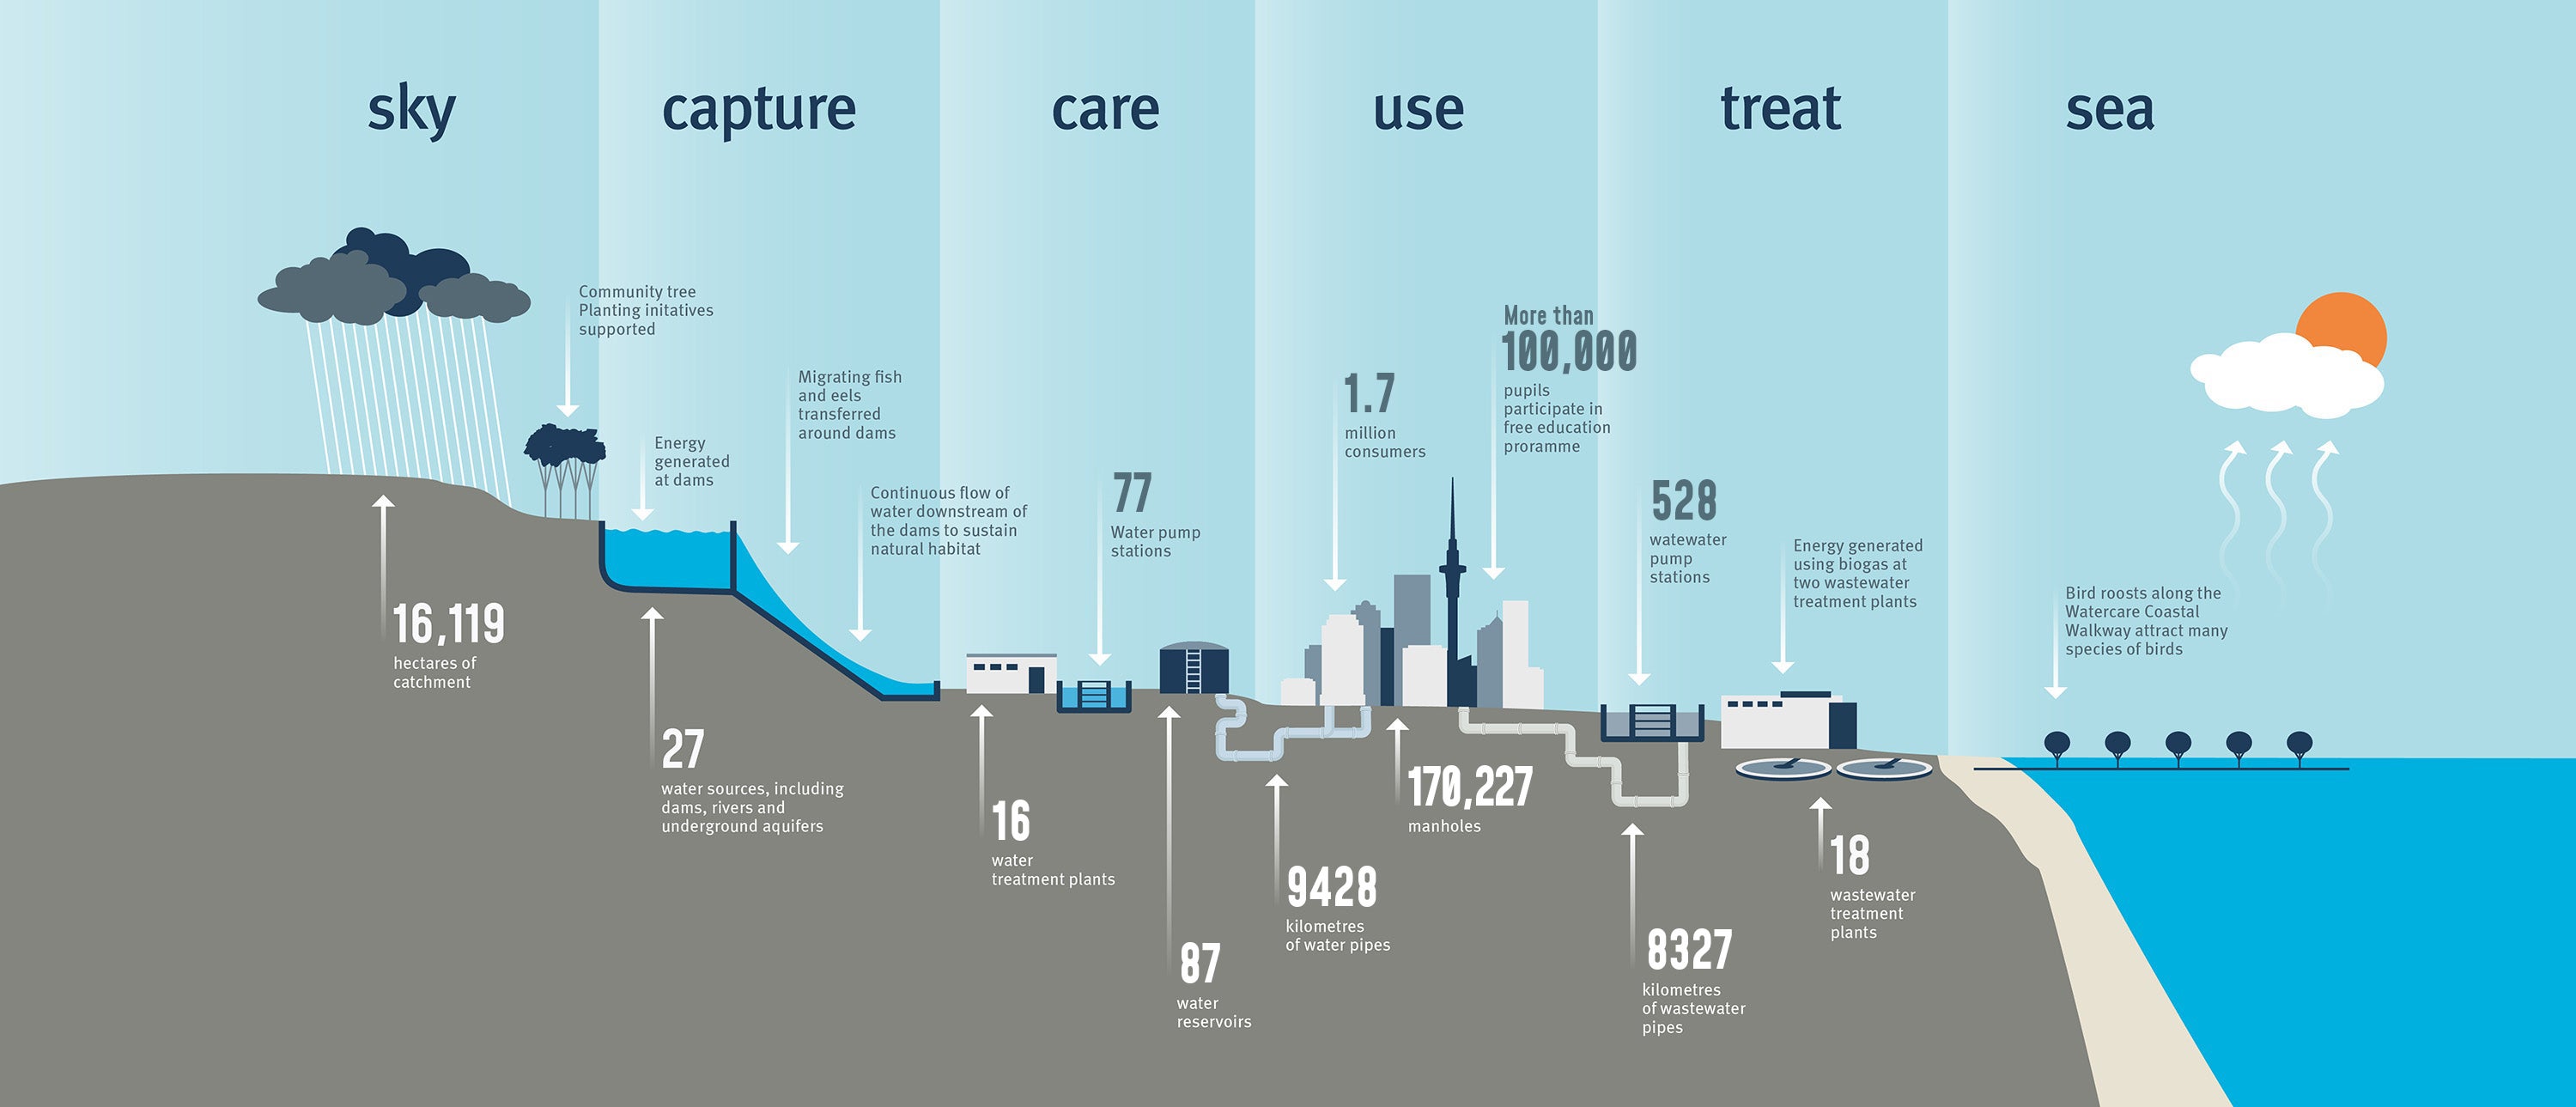 Sky to sea diagram of what Watercare does